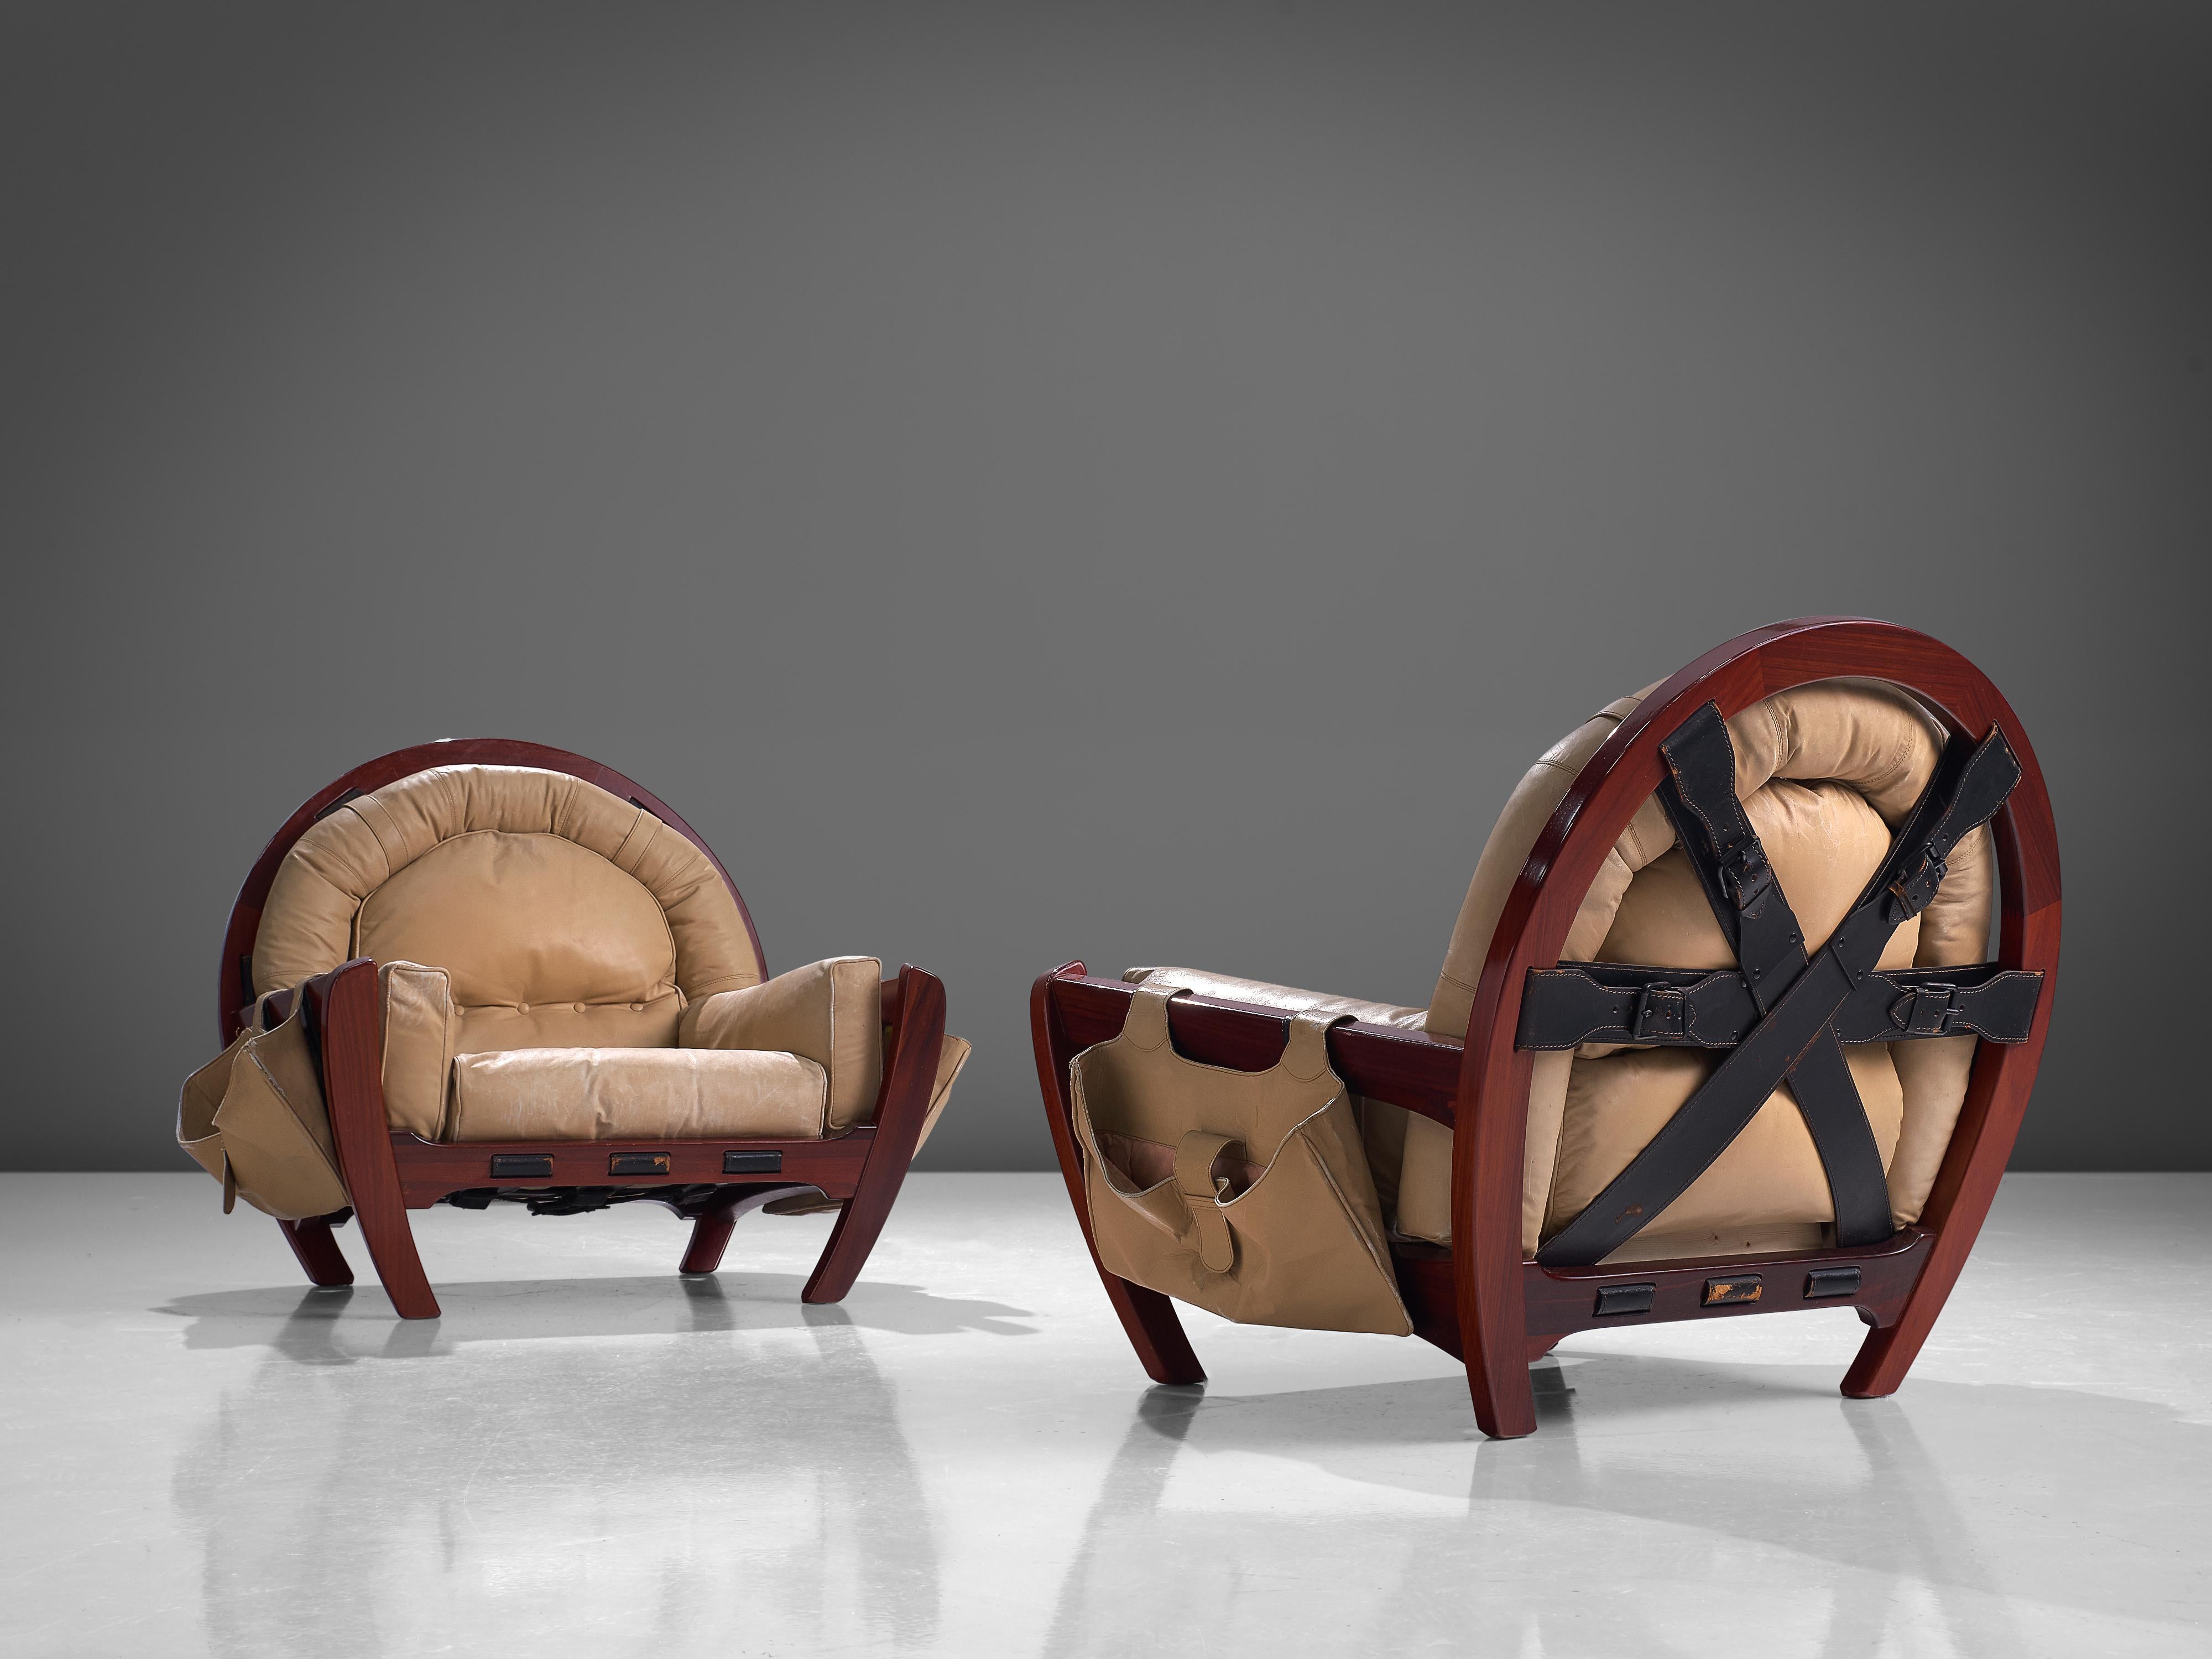 Luciano Frigerio, pair of lounge chairs model 'Rancero', mahogany, leather, Italy, 1970s

A pair of 'Rancero' lounge chairs with red stained wooden frames, designed by the Italian designer Luciano Frigerio. This model is also called 'The Throne for